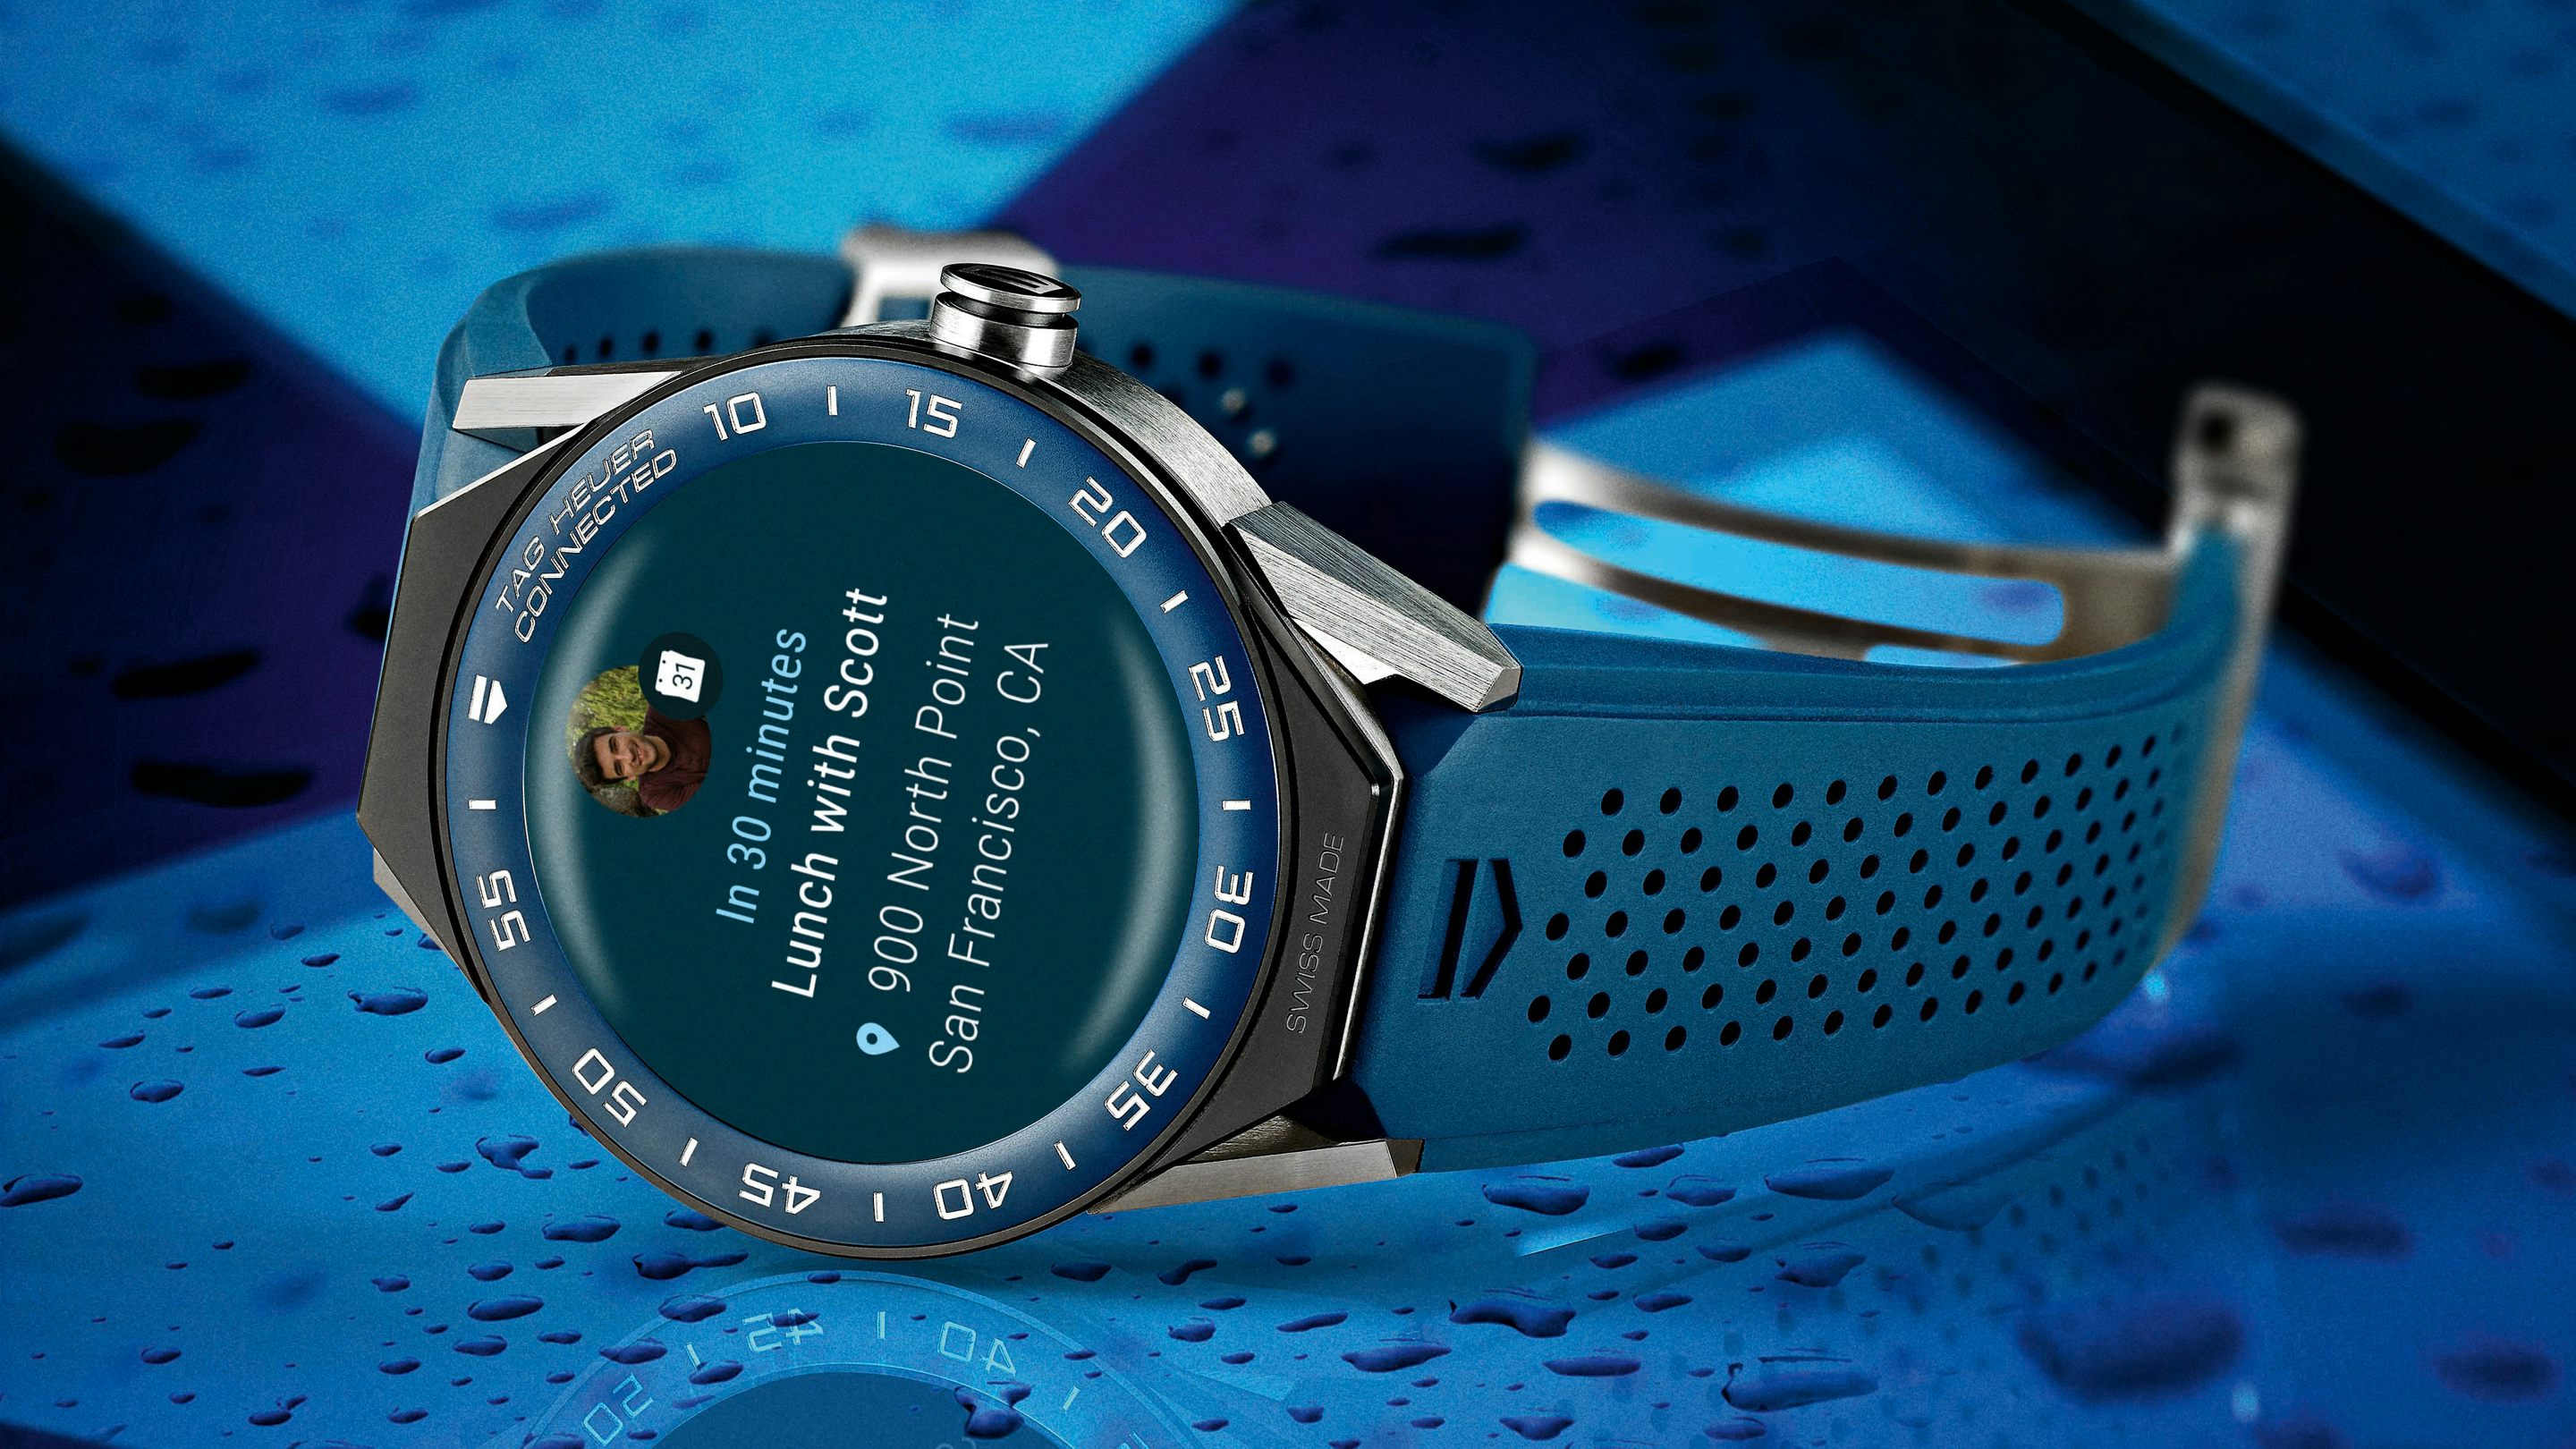 Tag Heuer, Intel Challenge Apple With Android Smartwatch